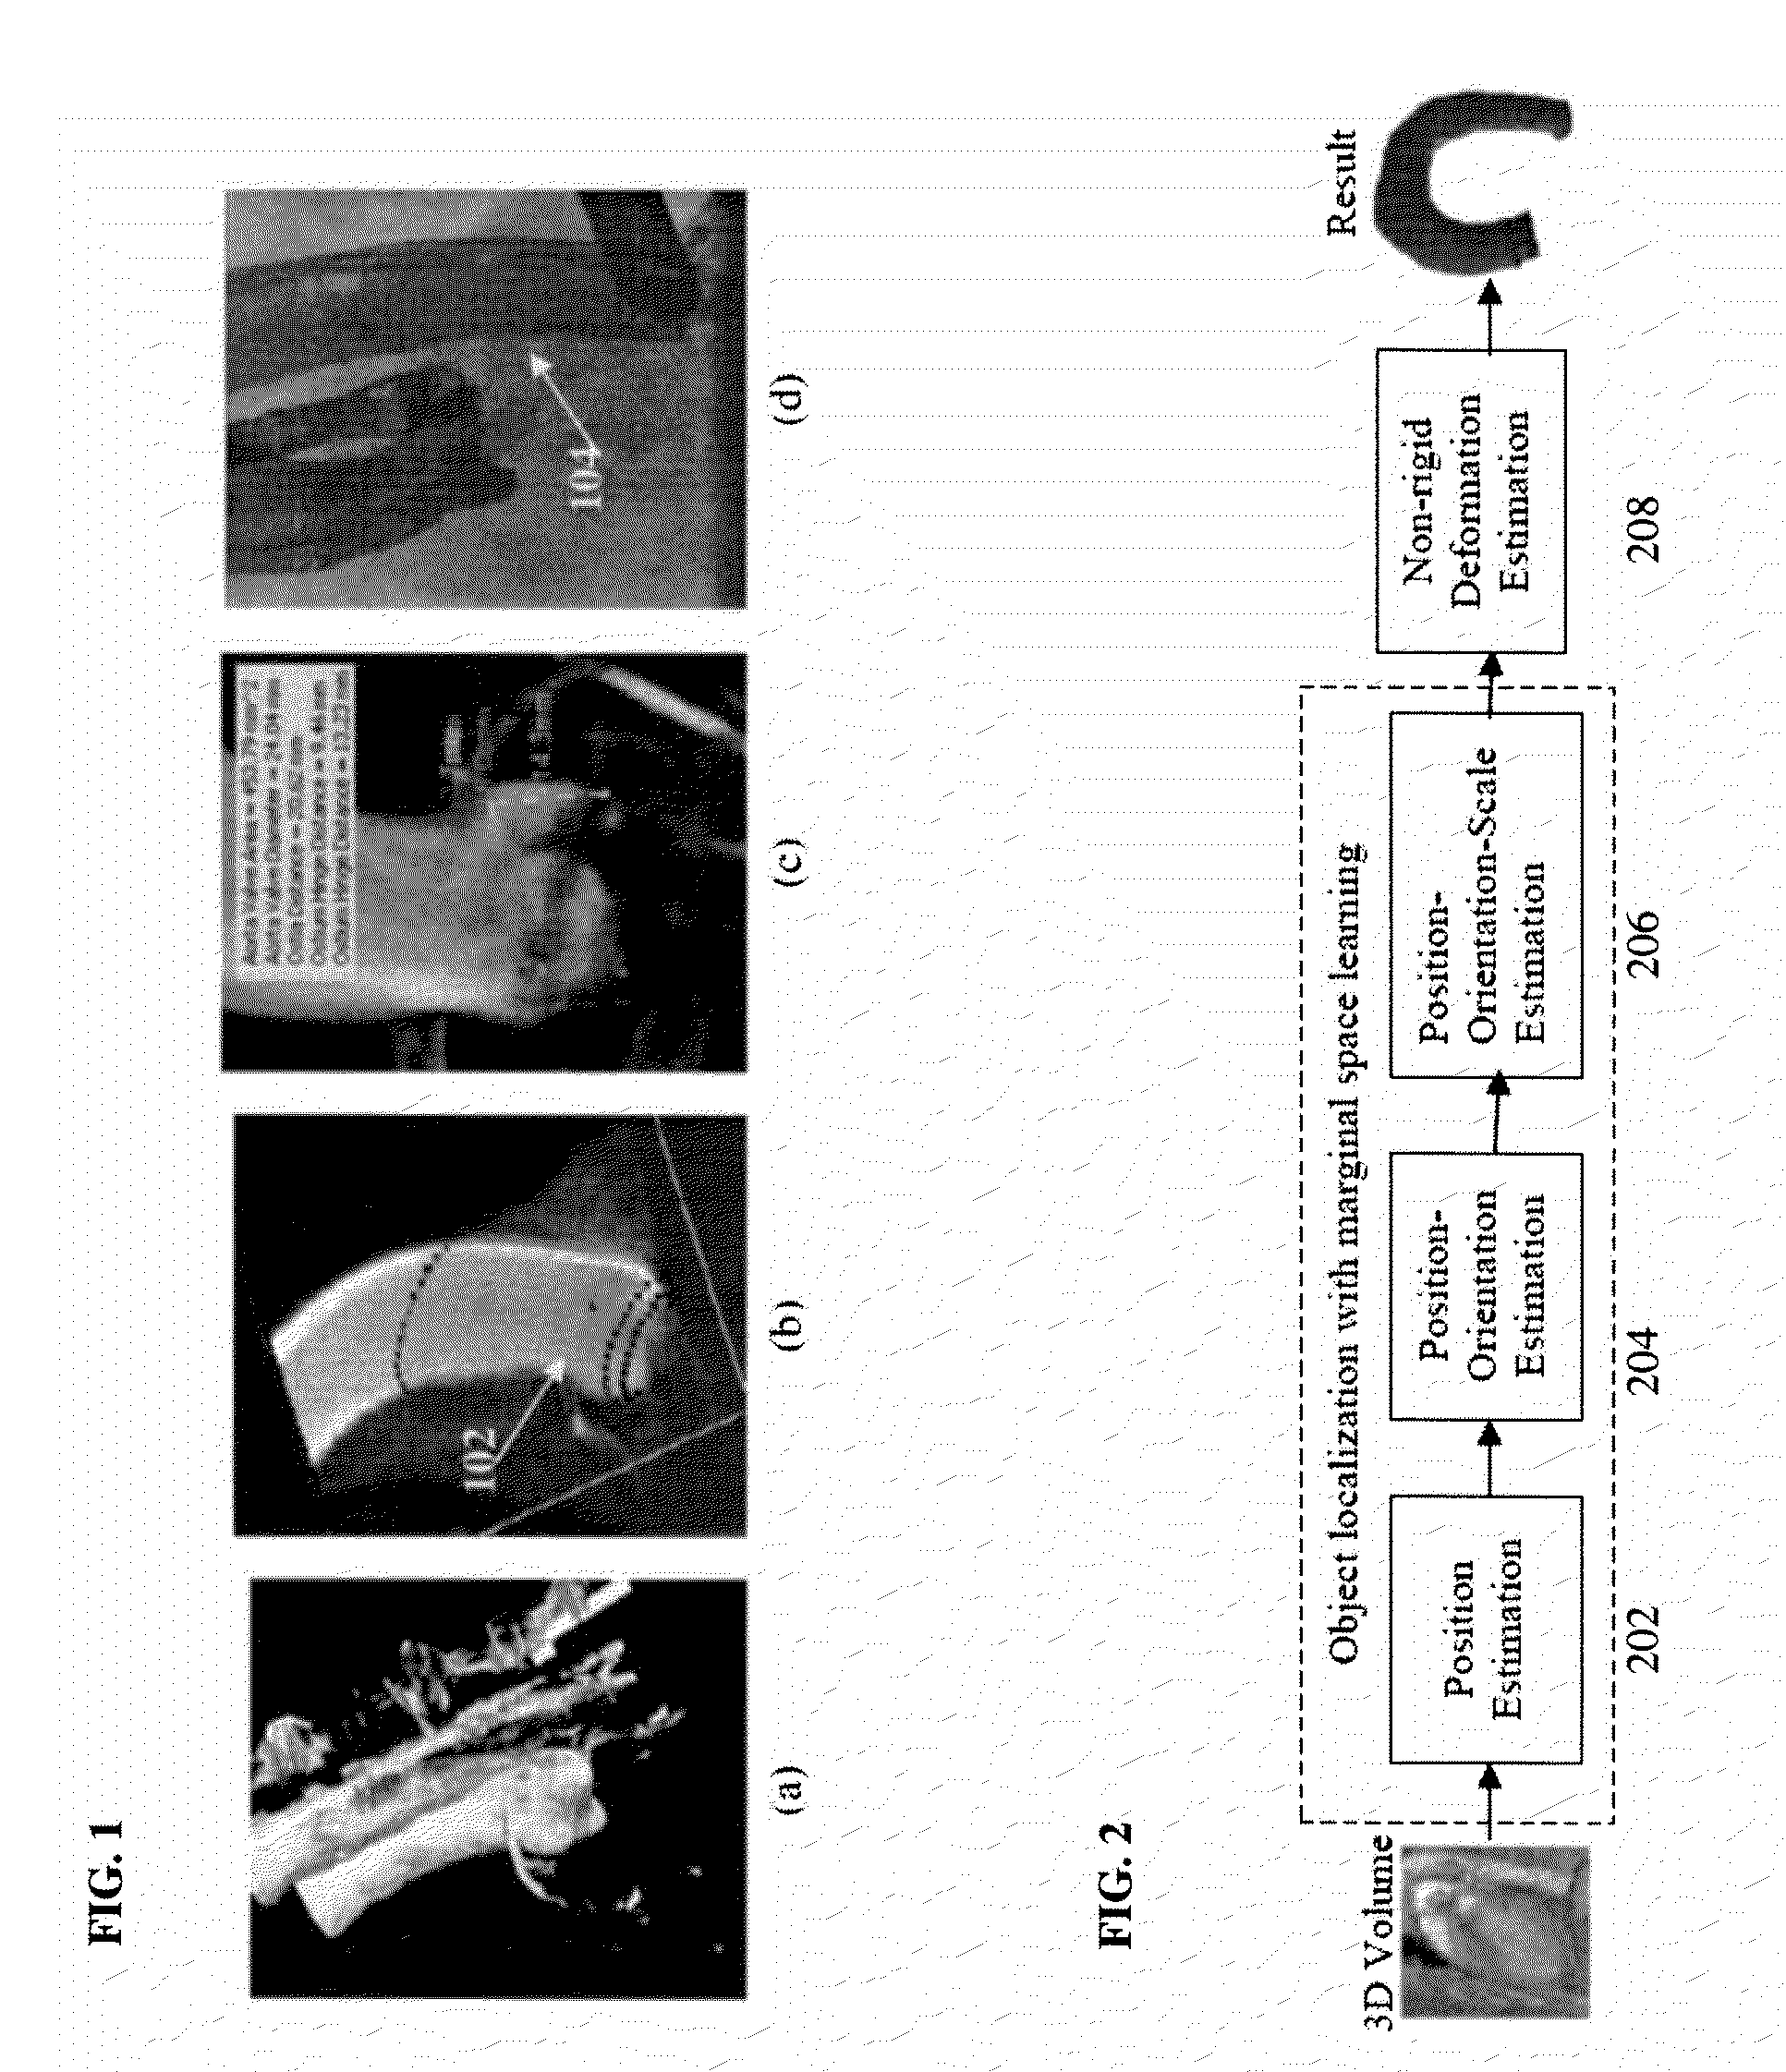 Method and System for Automatic Aorta Segmentation